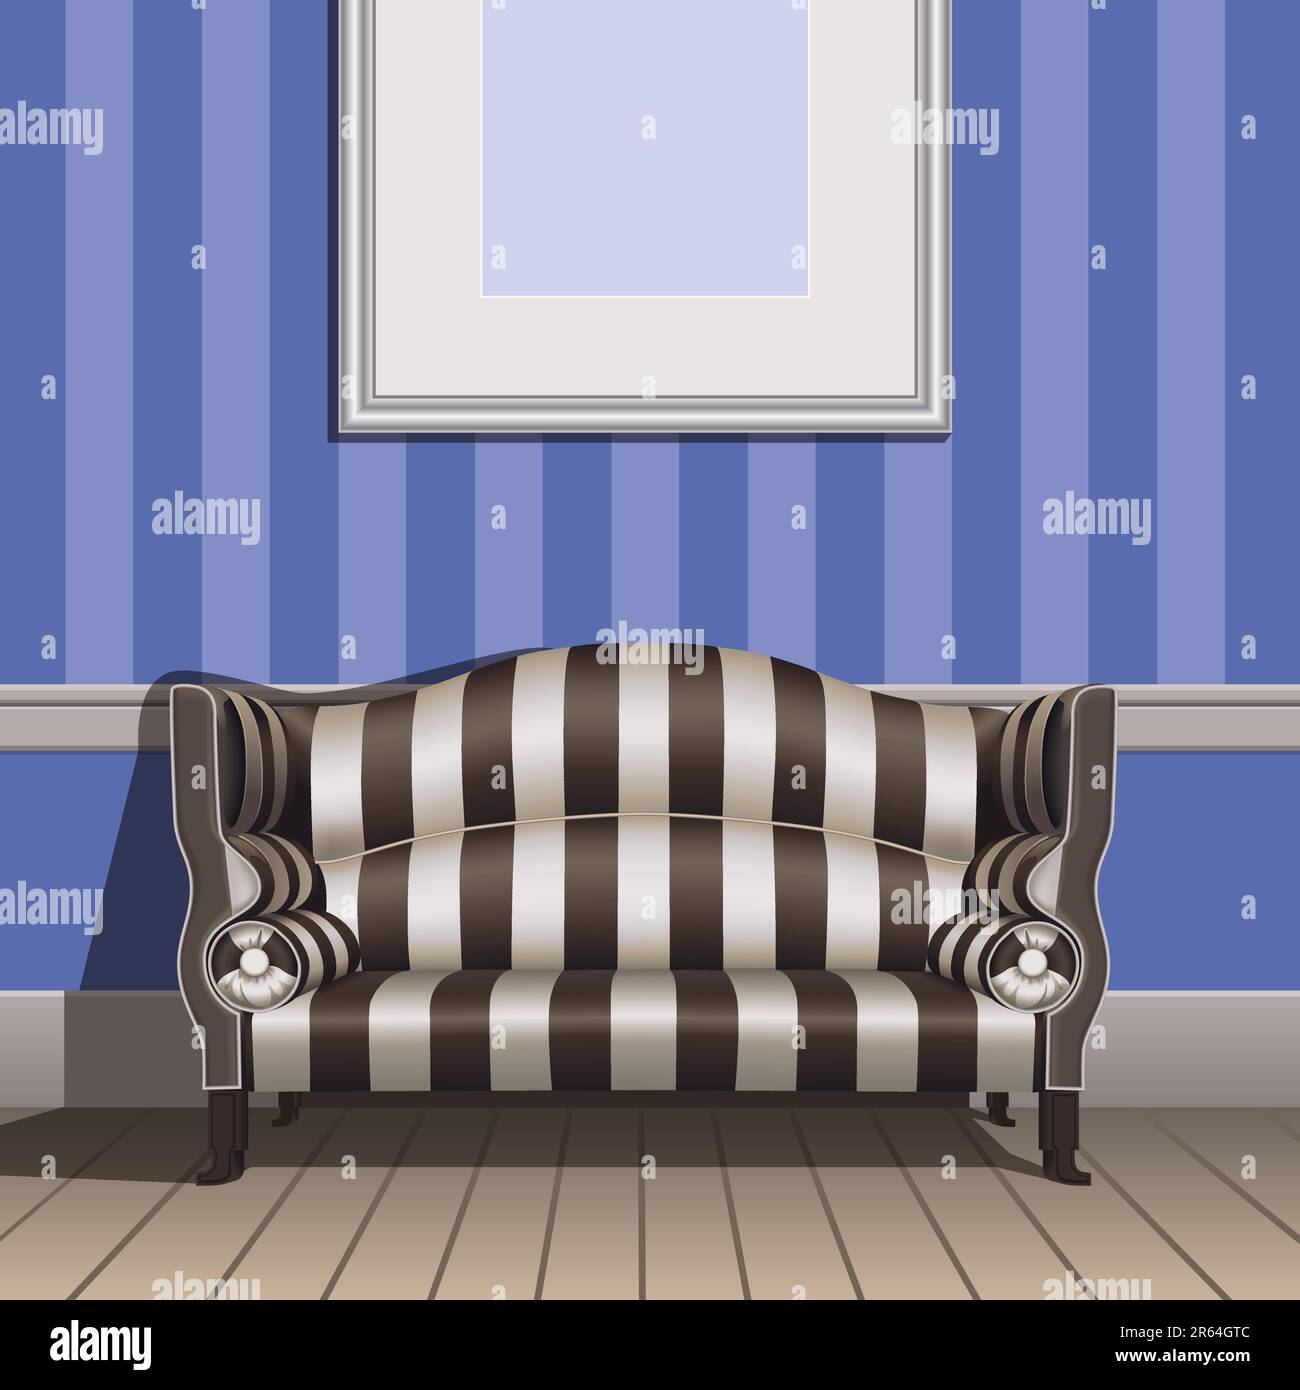 Part of interior with elegant classic sofa.Wall and sofa have striped upholstery.   Interior is in blue-brown-creme colors. Stock Vector